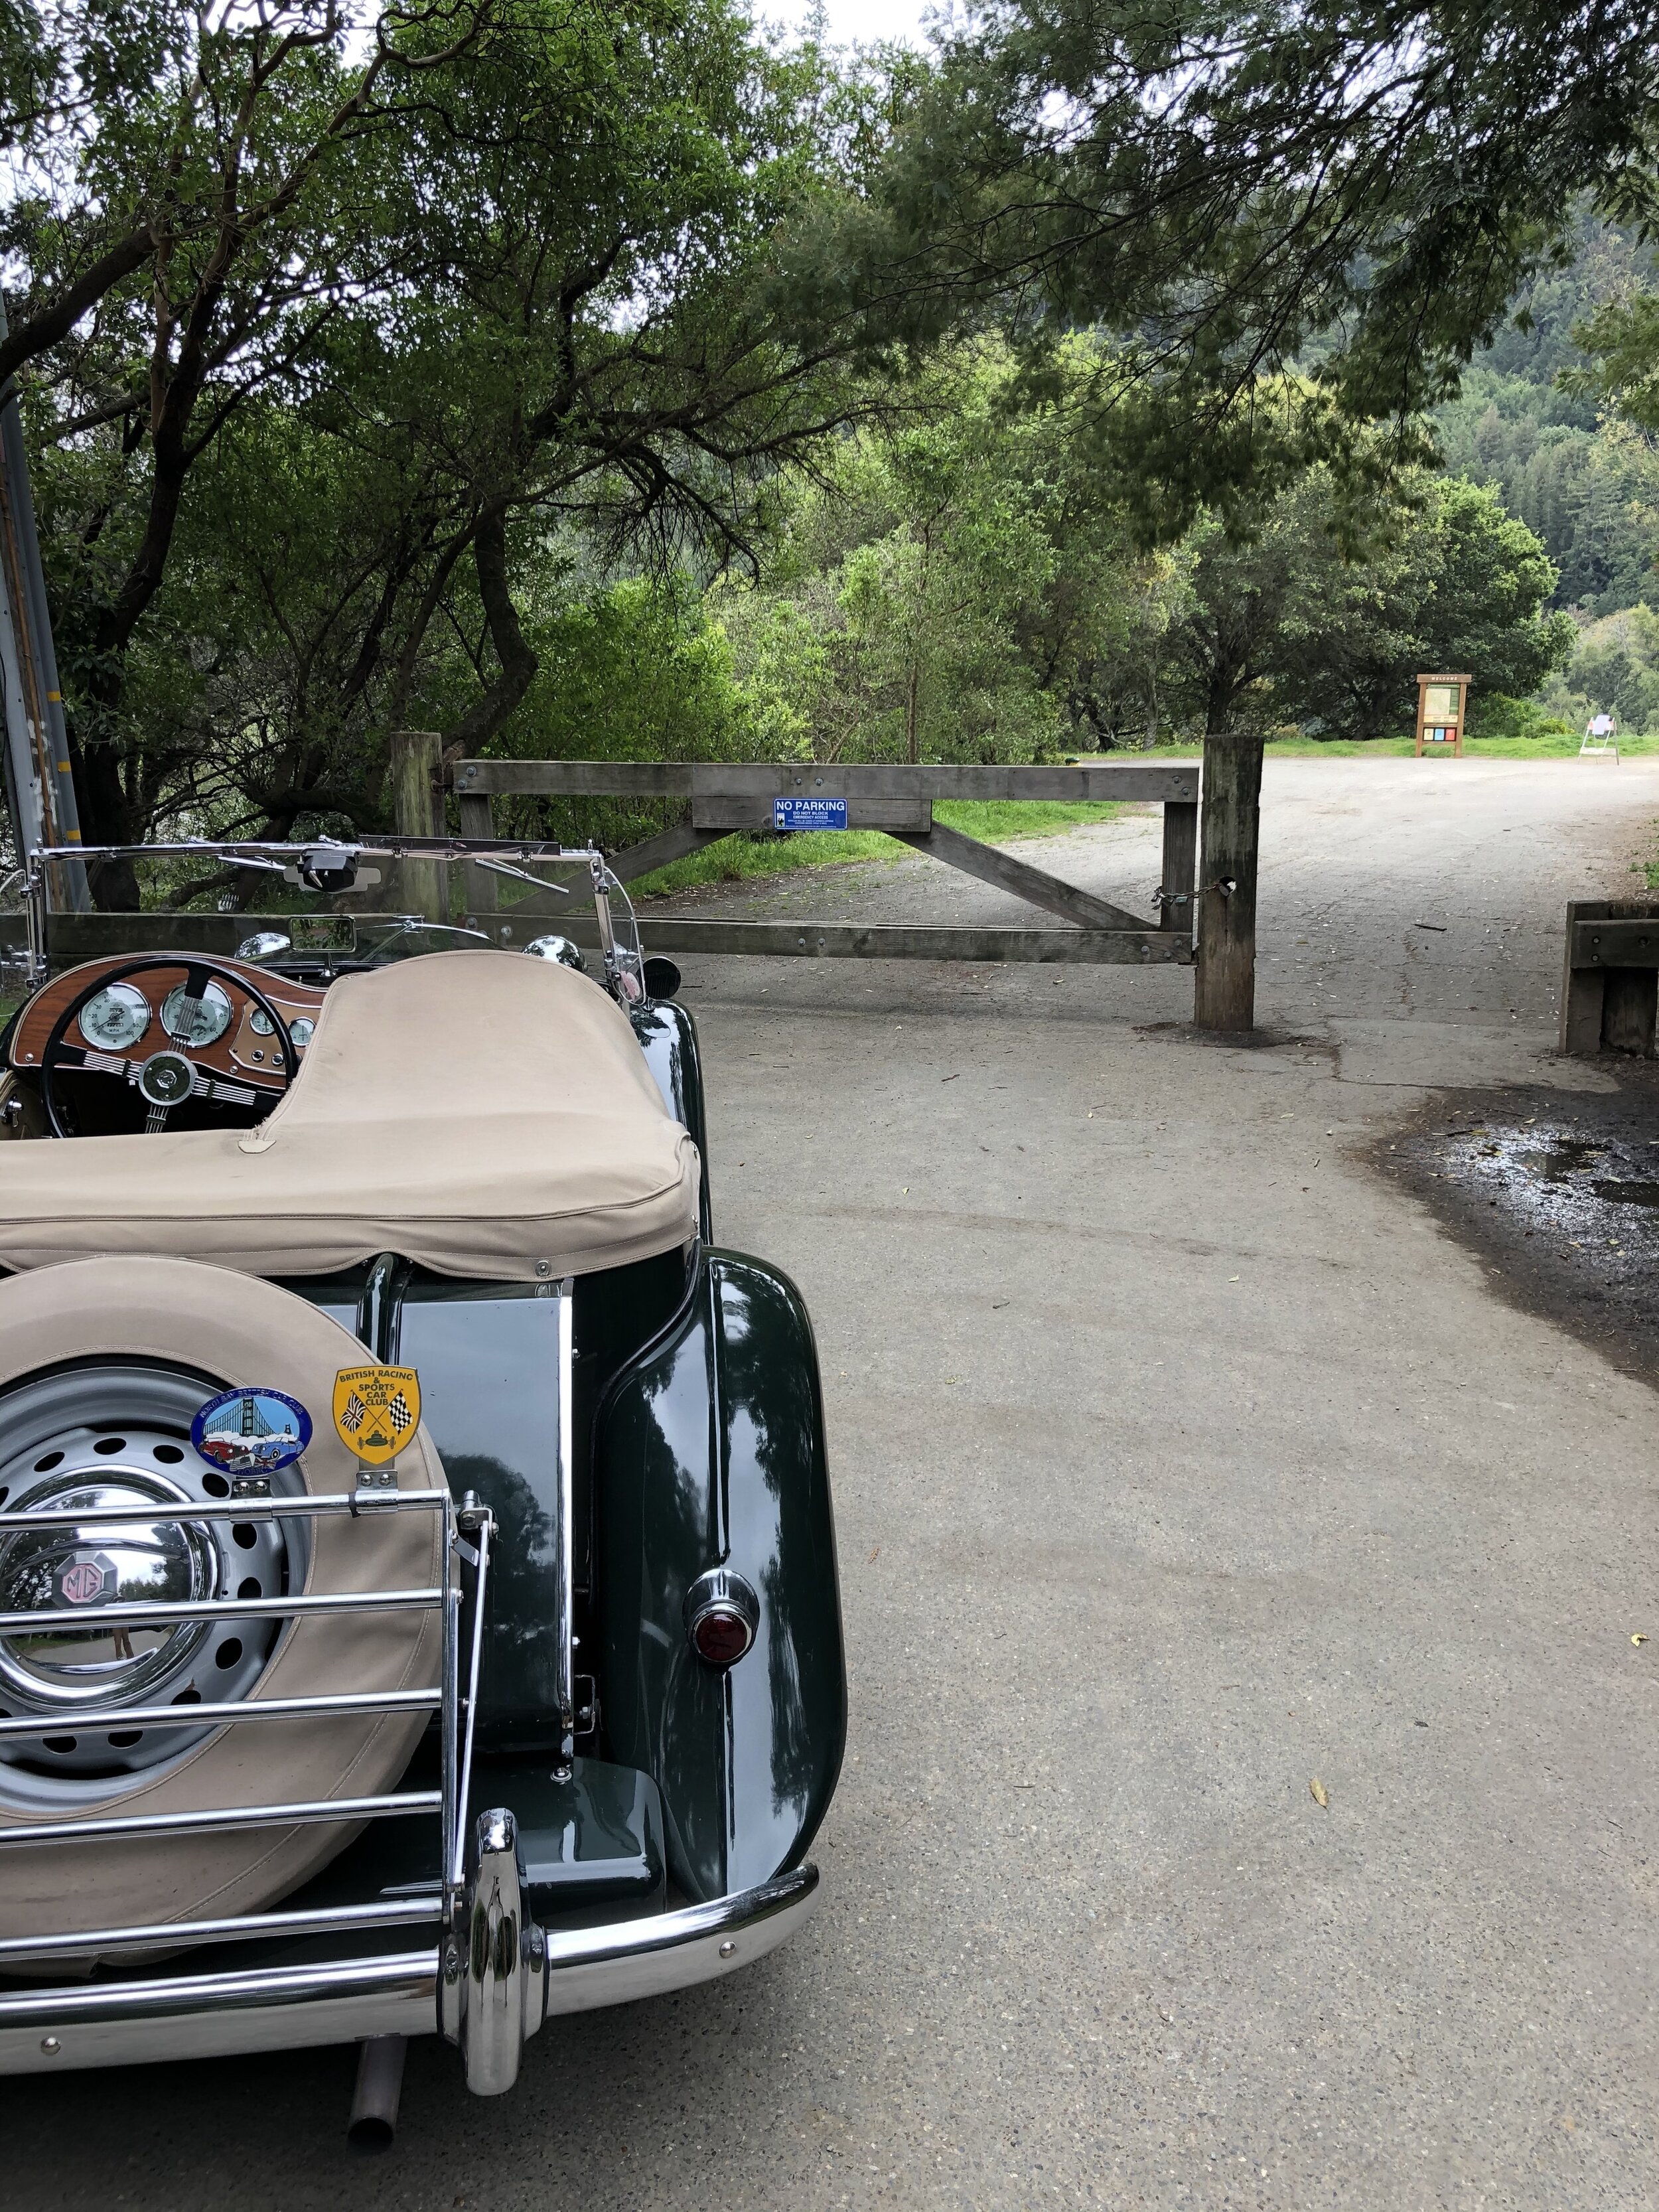 Taking the MG out for a spin, I had to investigate if there was access to one of our favorite walks starting at the Crown Road trailhead.  It was open but posted that social distancing was advised.  